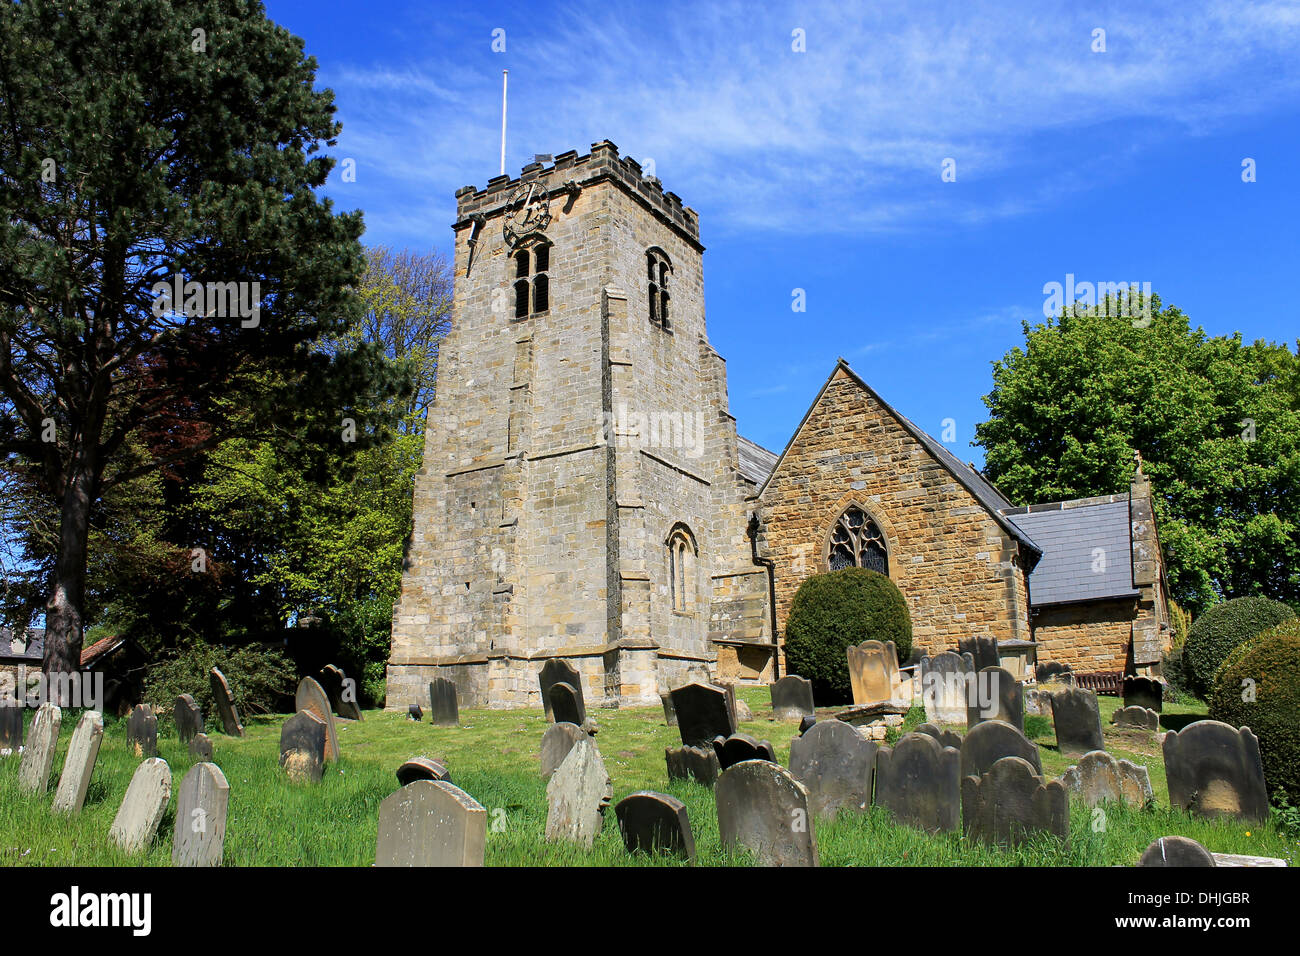 Scenic view of old village church with cemetery in foreground, England. Stock Photo